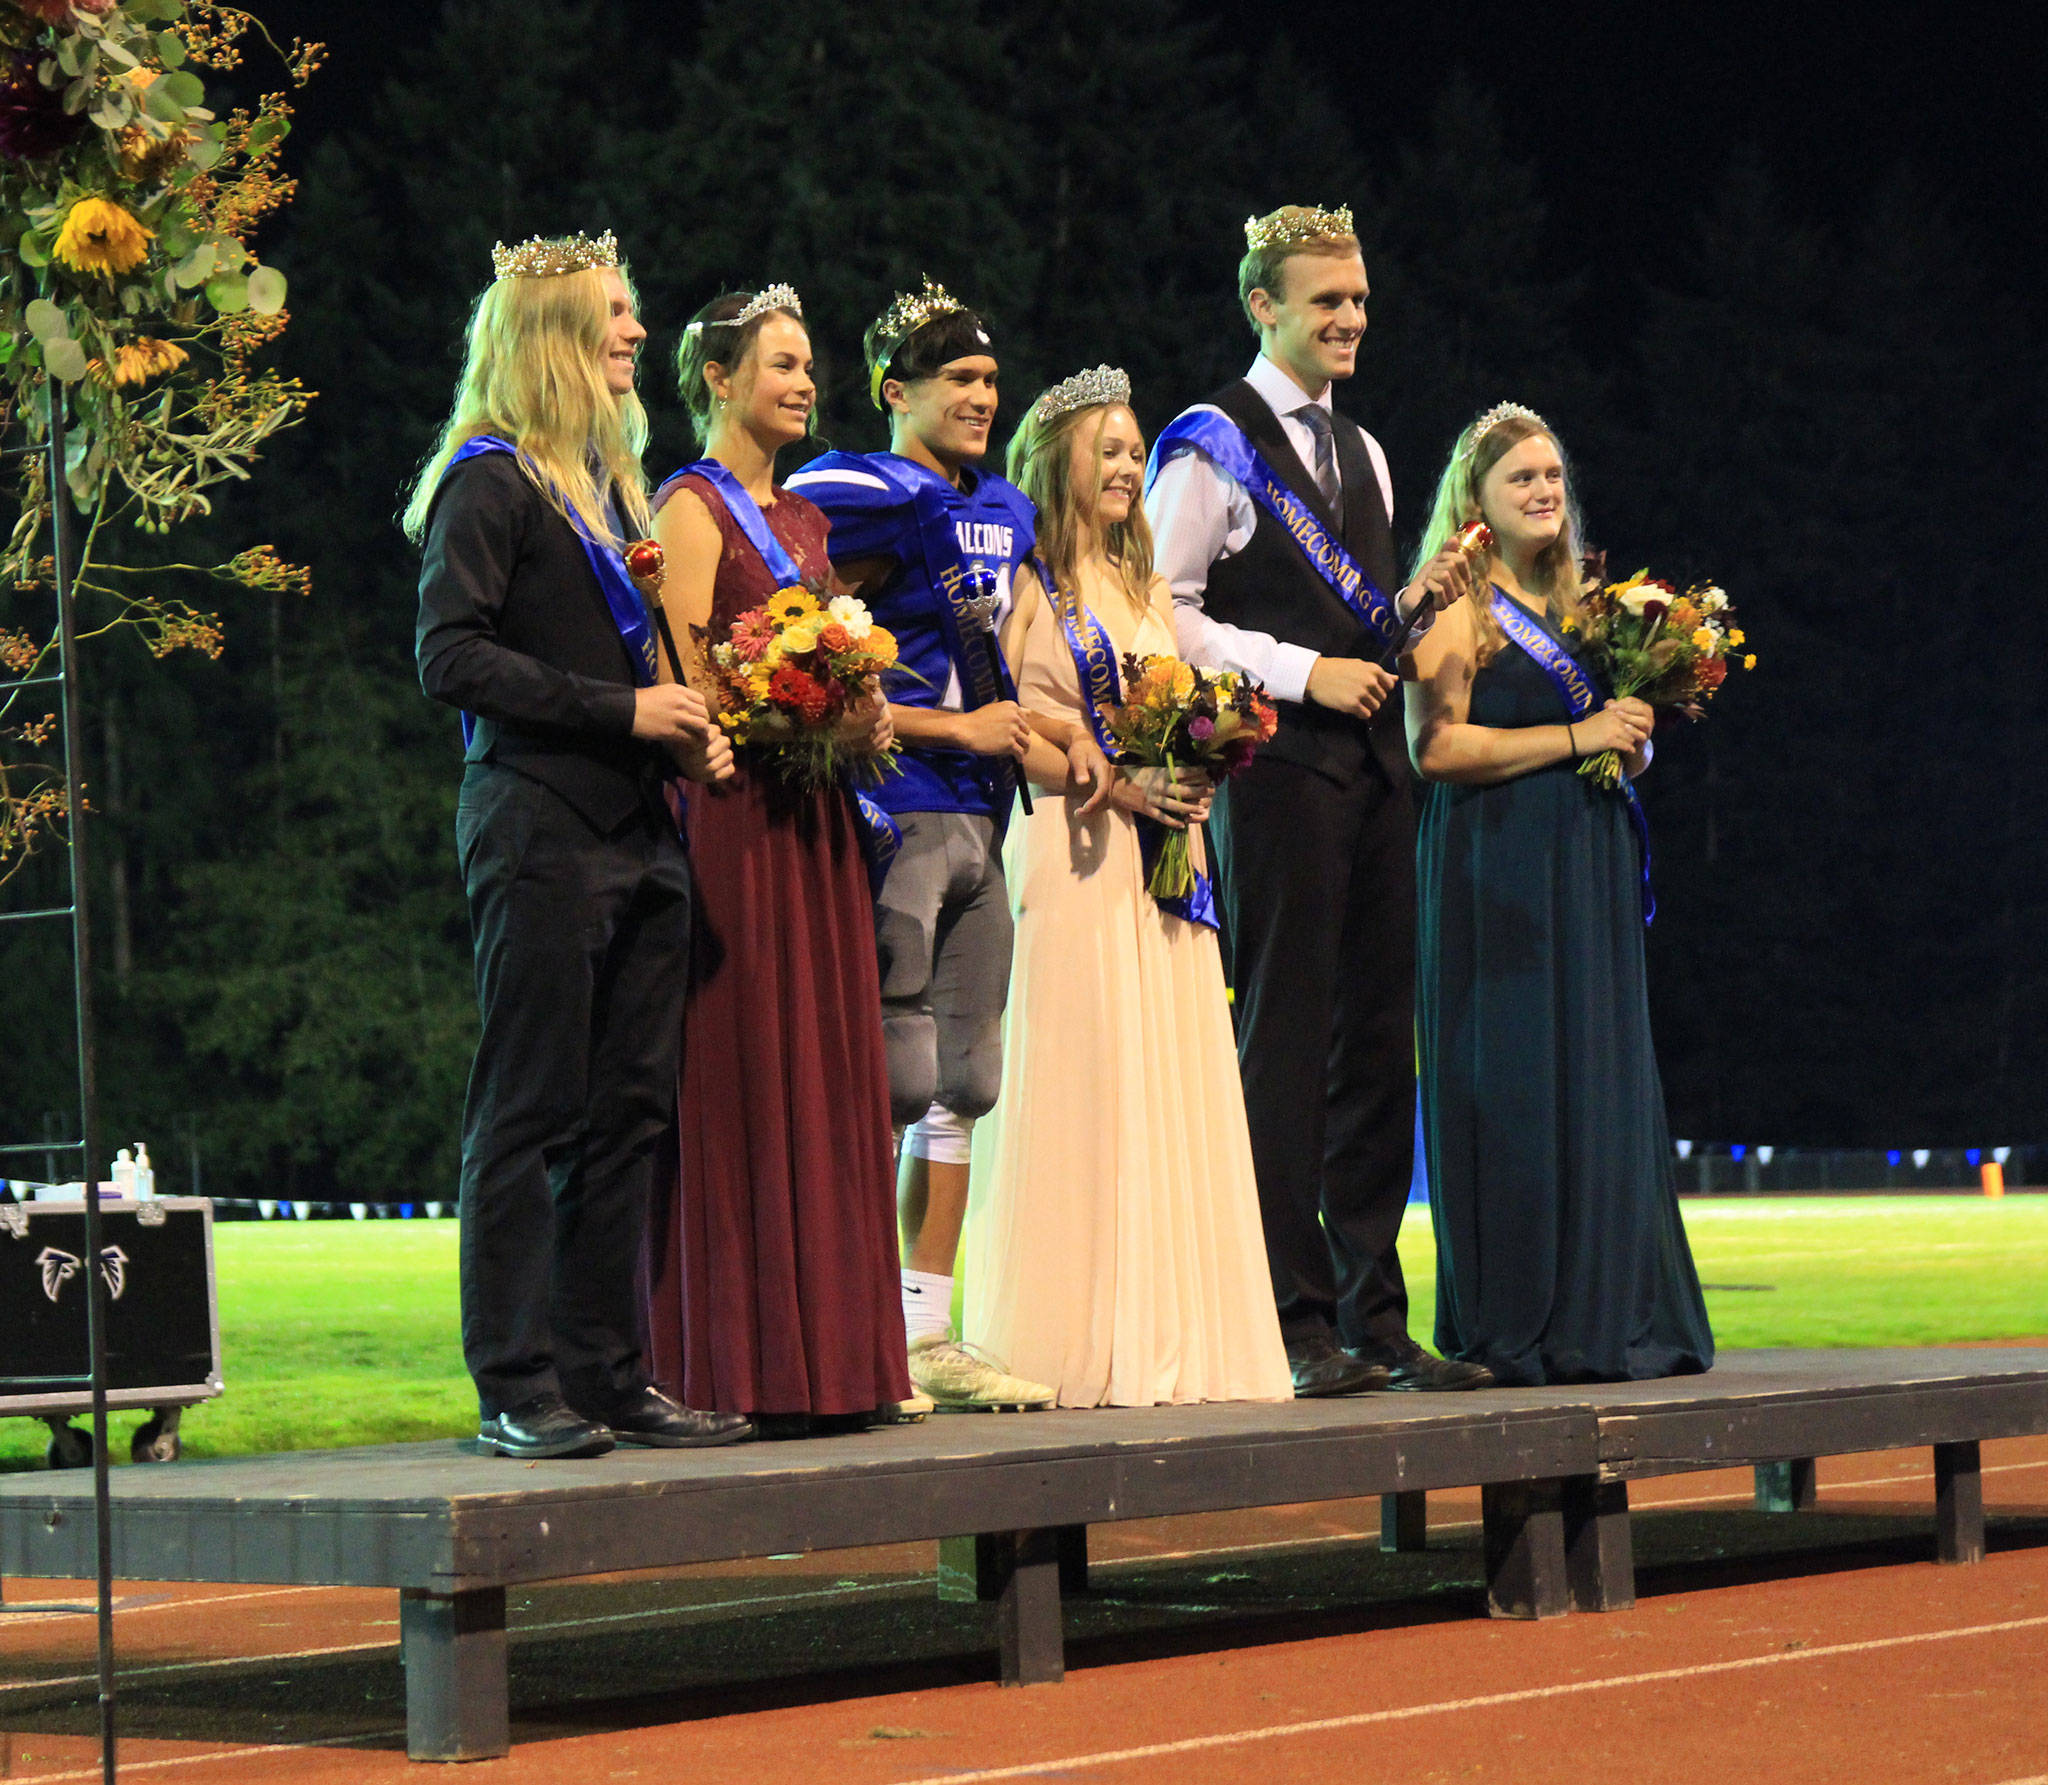 South Whidbey celebrated homecoming Friday. The royal court included Sam Baesler, left, Alison Papritz, King Alex Black, Queen Mallory Drye, Levi Buck and Oliana Stange.(Photo by Jim Waller/South Whidbey Record)